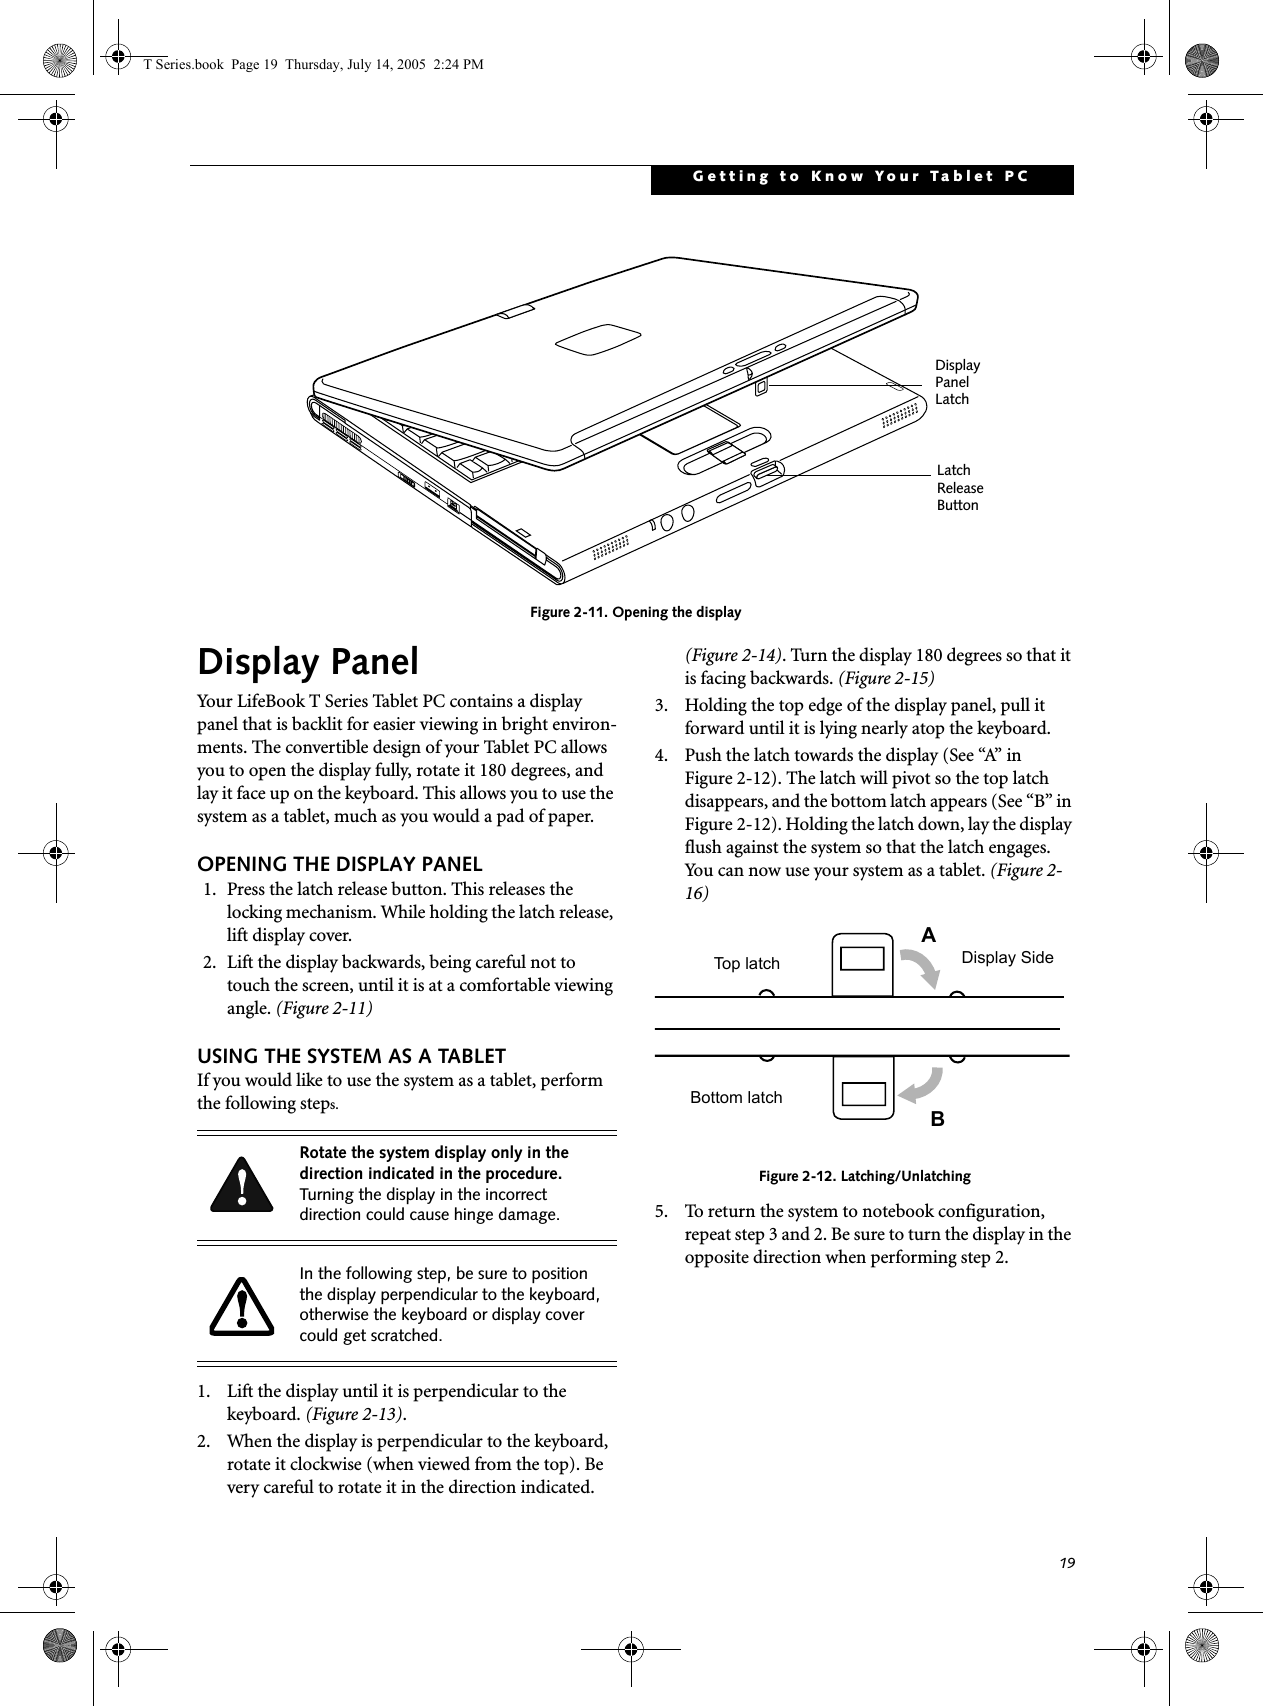 19Getting to Know Your Tablet PCFigure 2-11. Opening the displayDisplay PanelYour LifeBook T Series Tablet PC contains a display panel that is backlit for easier viewing in bright environ-ments. The convertible design of your Tablet PC allows you to open the display fully, rotate it 180 degrees, and lay it face up on the keyboard. This allows you to use the system as a tablet, much as you would a pad of paper.OPENING THE DISPLAY PANEL1. Press the latch release button. This releases the locking mechanism. While holding the latch release, lift display cover.2. Lift the display backwards, being careful not to touch the screen, until it is at a comfortable viewing angle. (Figure 2-11)USING THE SYSTEM AS A TABLETIf you would like to use the system as a tablet, perform the following steps. 1. Lift the display until it is perpendicular to the keyboard. (Figure 2-13).2. When the display is perpendicular to the keyboard, rotate it clockwise (when viewed from the top). Be very careful to rotate it in the direction indicated. (Figure 2-14). Turn the display 180 degrees so that it is facing backwards. (Figure 2-15)3. Holding the top edge of the display panel, pull it forward until it is lying nearly atop the keyboard.4. Push the latch towards the display (See “A” in Figure 2-12). The latch will pivot so the top latch disappears, and the bottom latch appears (See “B” in Figure 2-12). Holding the latch down, lay the display flush against the system so that the latch engages. You can now use your system as a tablet. (Figure 2-16)Figure 2-12. Latching/Unlatching5. To return the system to notebook configuration, repeat step 3 and 2. Be sure to turn the display in the opposite direction when performing step 2.Display Panel LatchLatch ReleaseButtonRotate the system display only in the direction indicated in the procedure. Turning the display in the incorrect direction could cause hinge damage.In the following step, be sure to position the display perpendicular to the keyboard, otherwise the keyboard or display cover could get scratched.ABTop latchBottom latchDisplay SideT Series.book  Page 19  Thursday, July 14, 2005  2:24 PM